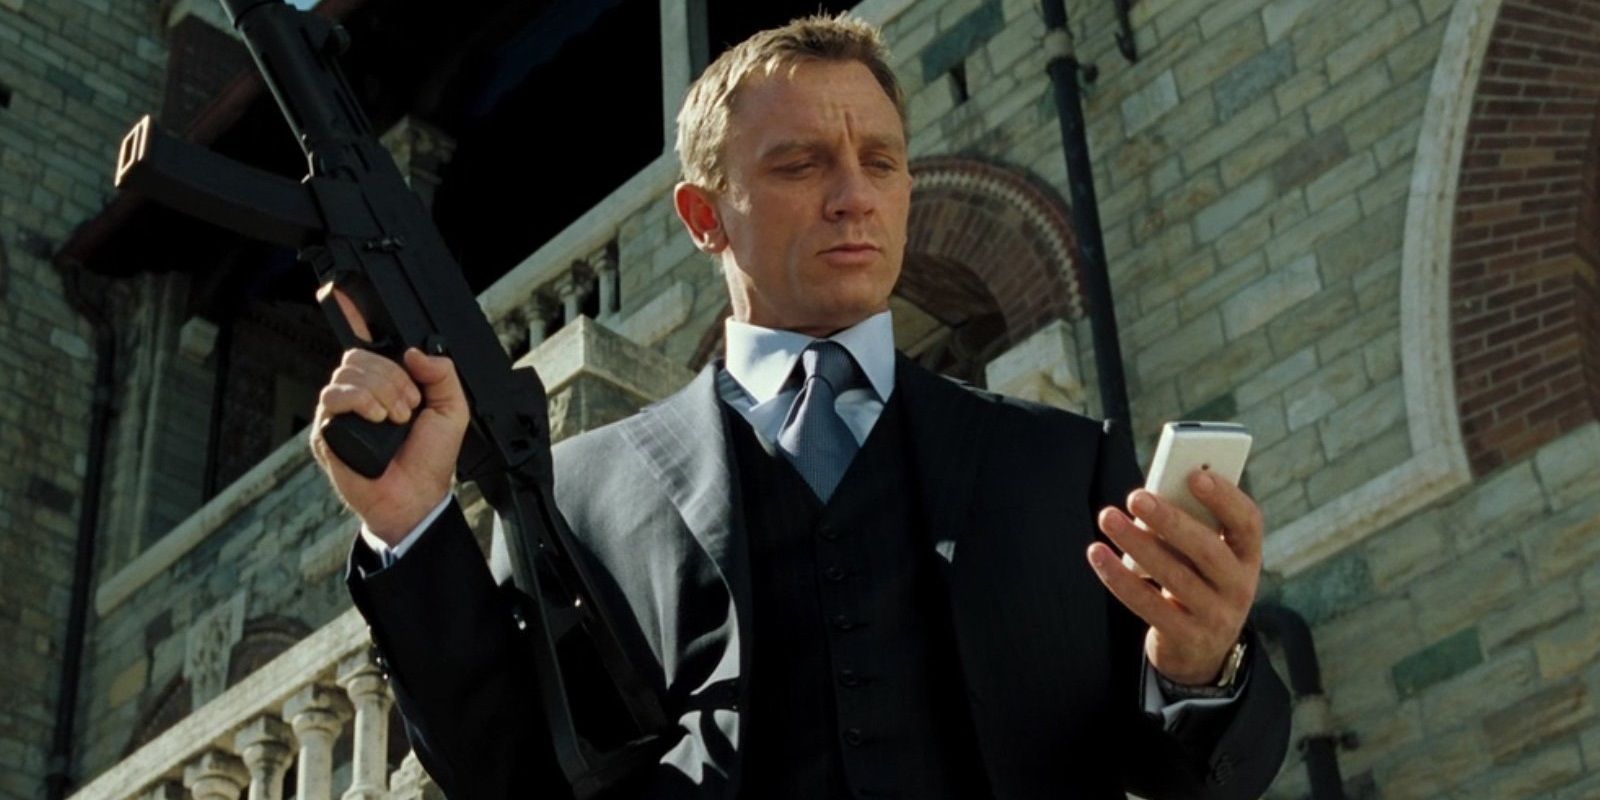 7 Reasons James Bond 26’s Reboot Is Harder After Daniel Craig’s 007 Era Than Previous Reinventions